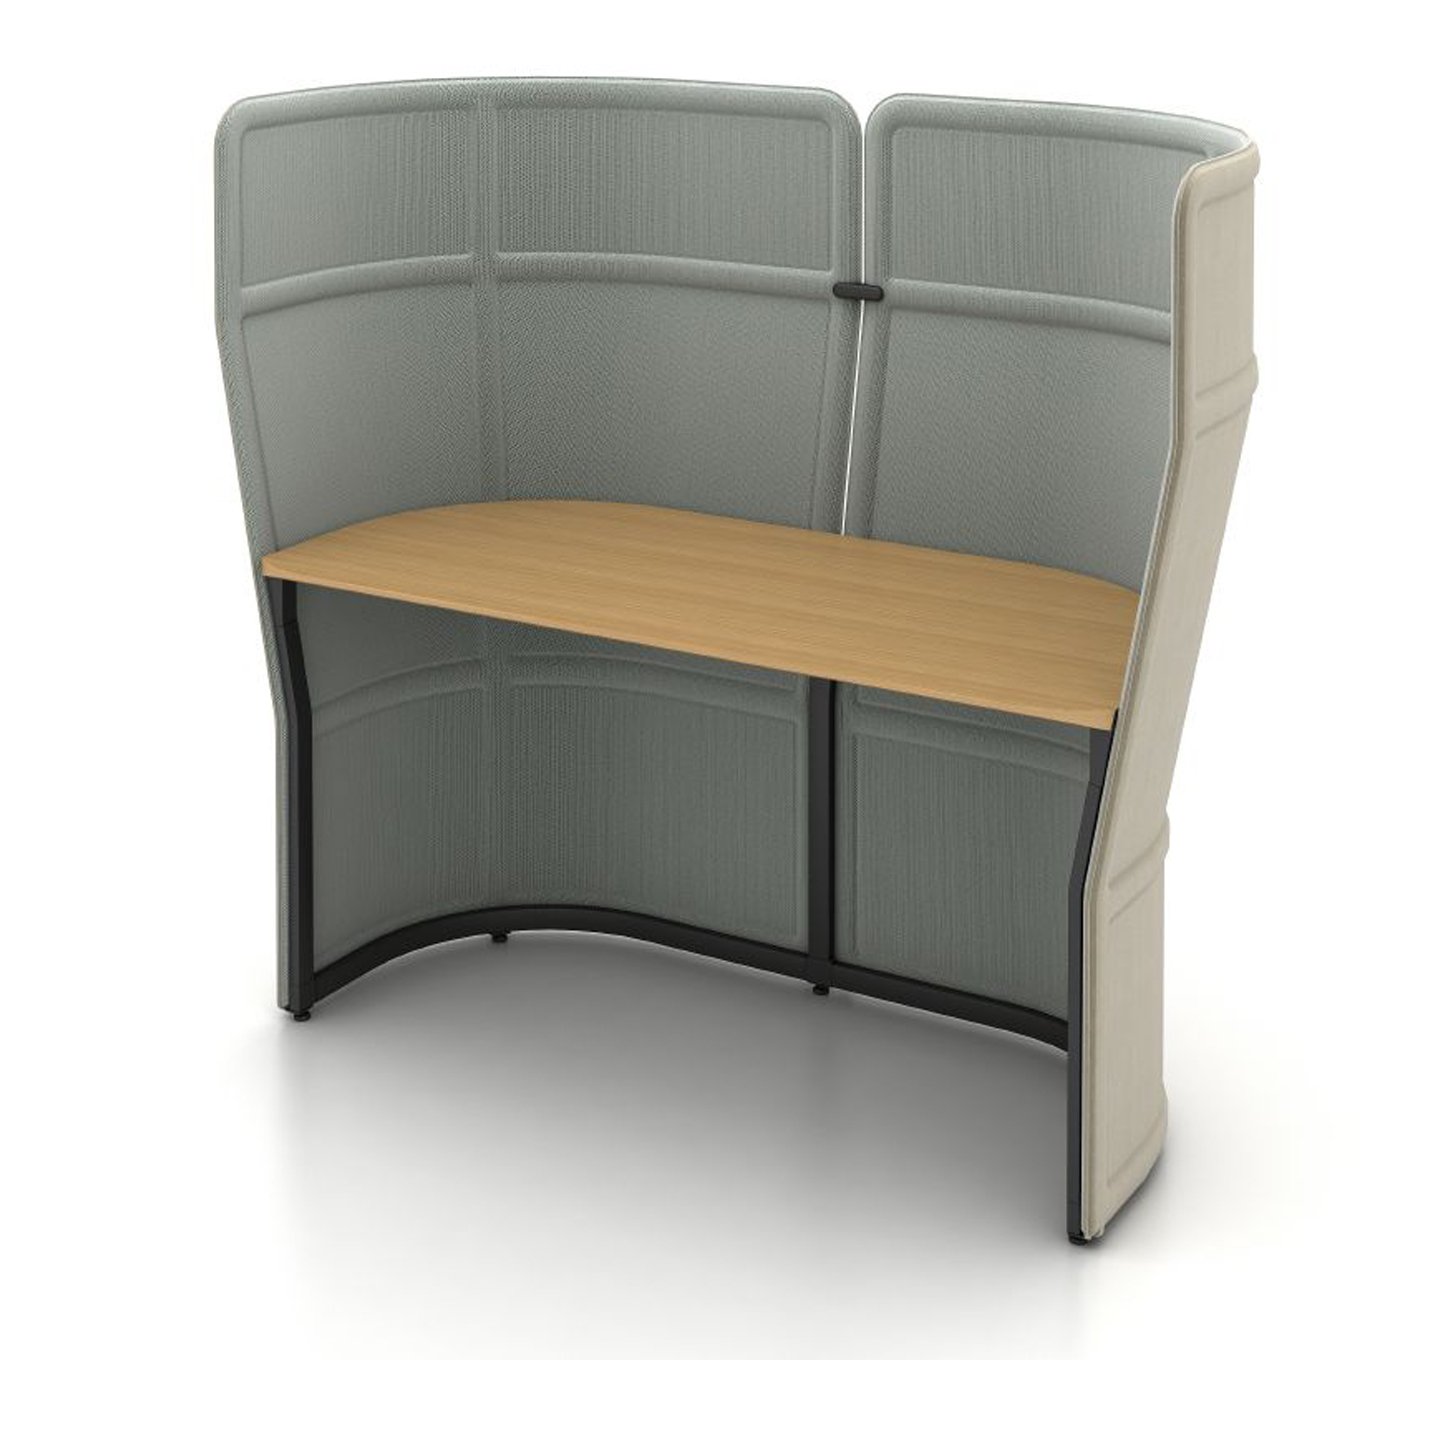 Haworth Openest Single Desk Booth in grey color with laminate desk